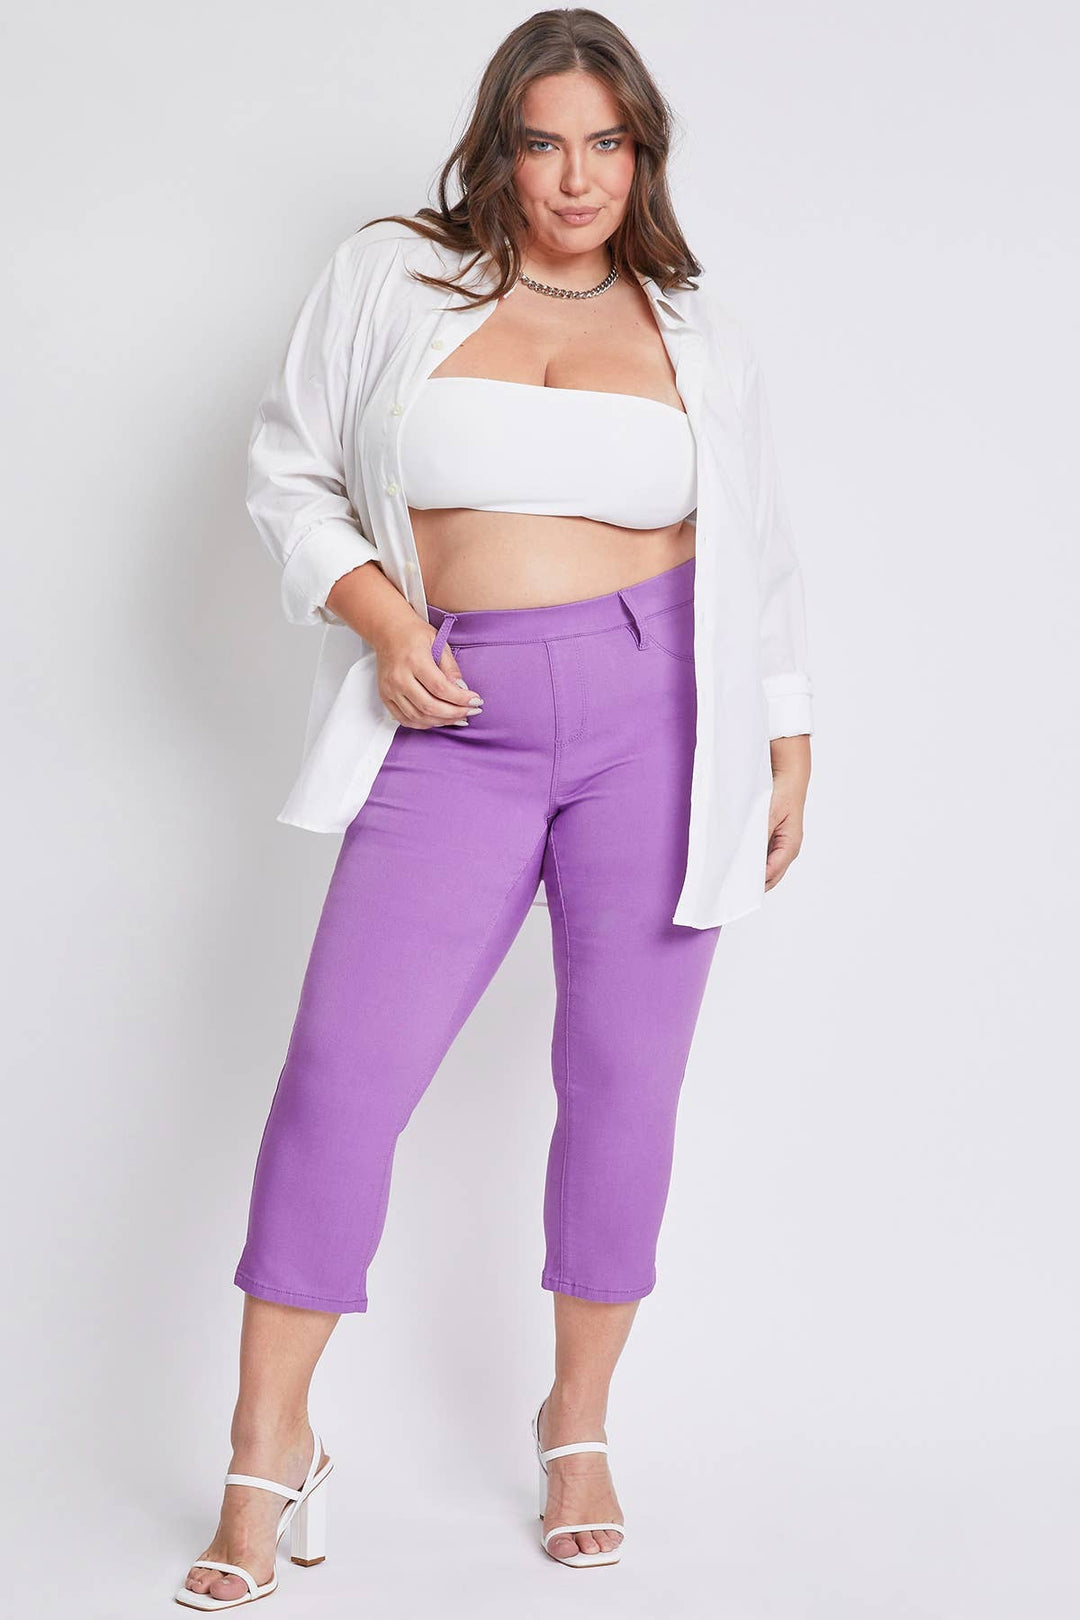 YMI Hyperstretch Pull On Capri Pants, Hydrangea-Pants-Inspired by Justeen-Women's Clothing Boutique in Chicago, Illinois